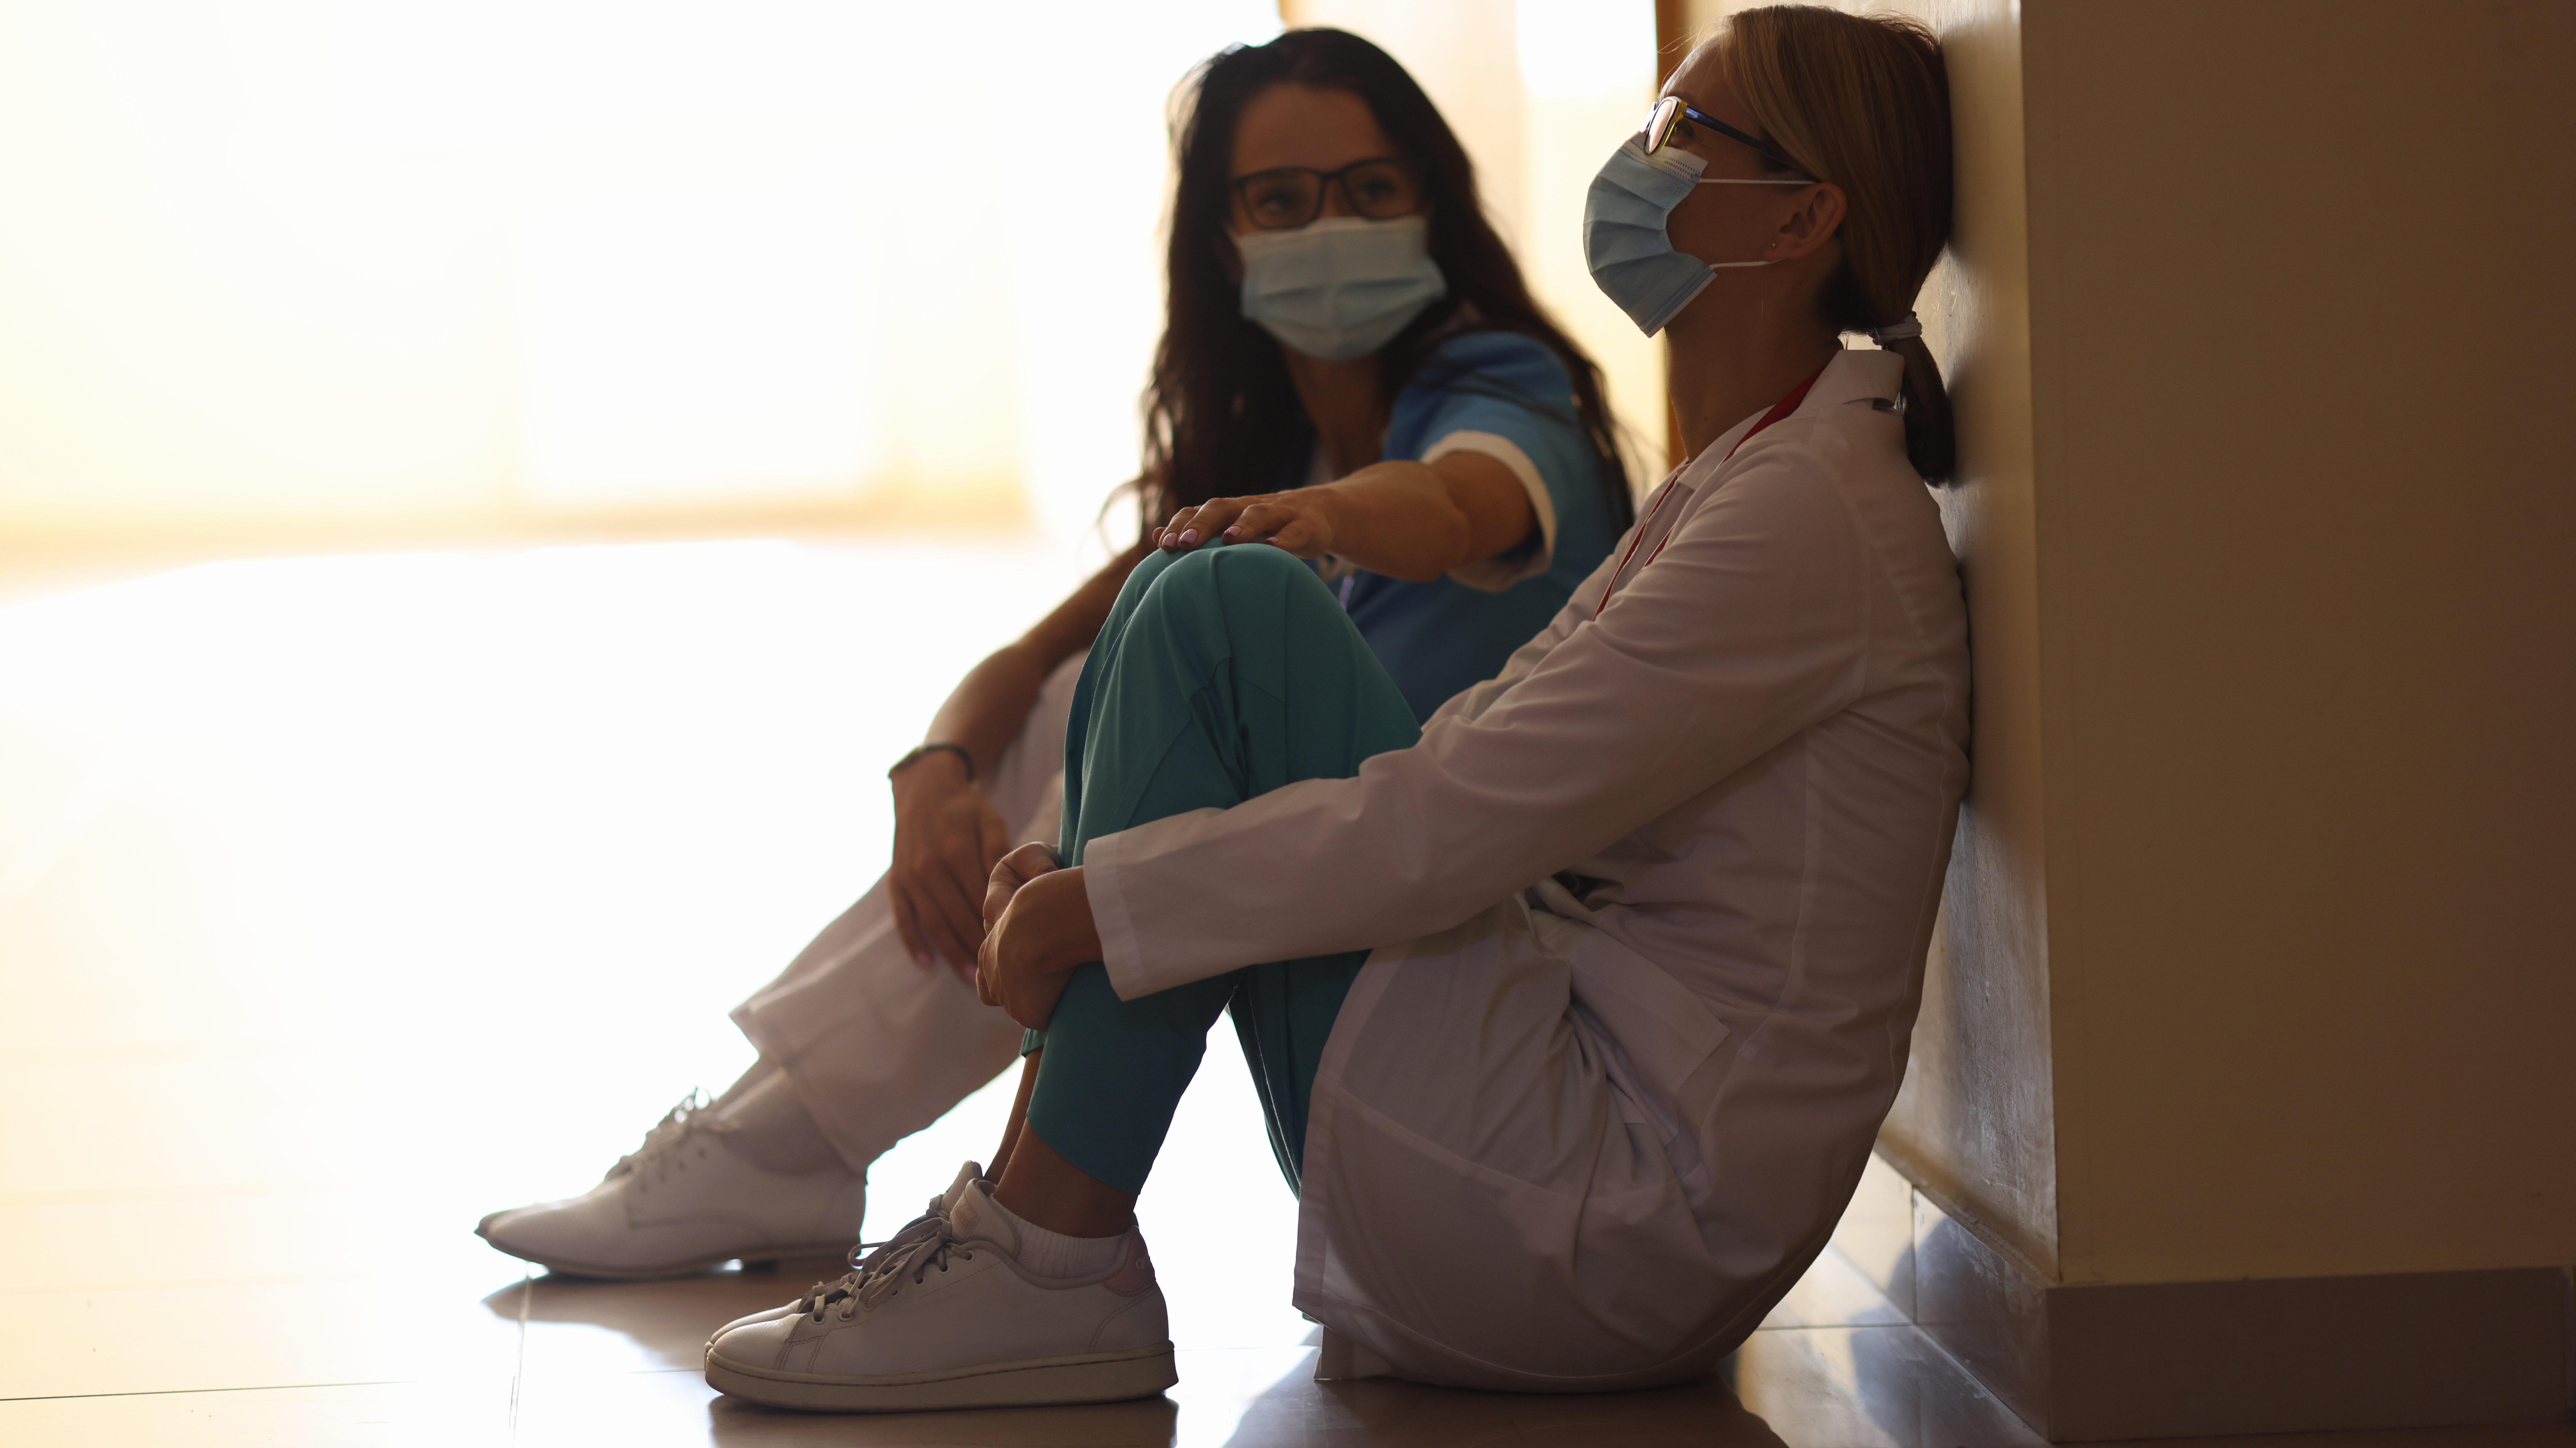 Two women healthcare workers are sitting in masks in corridor